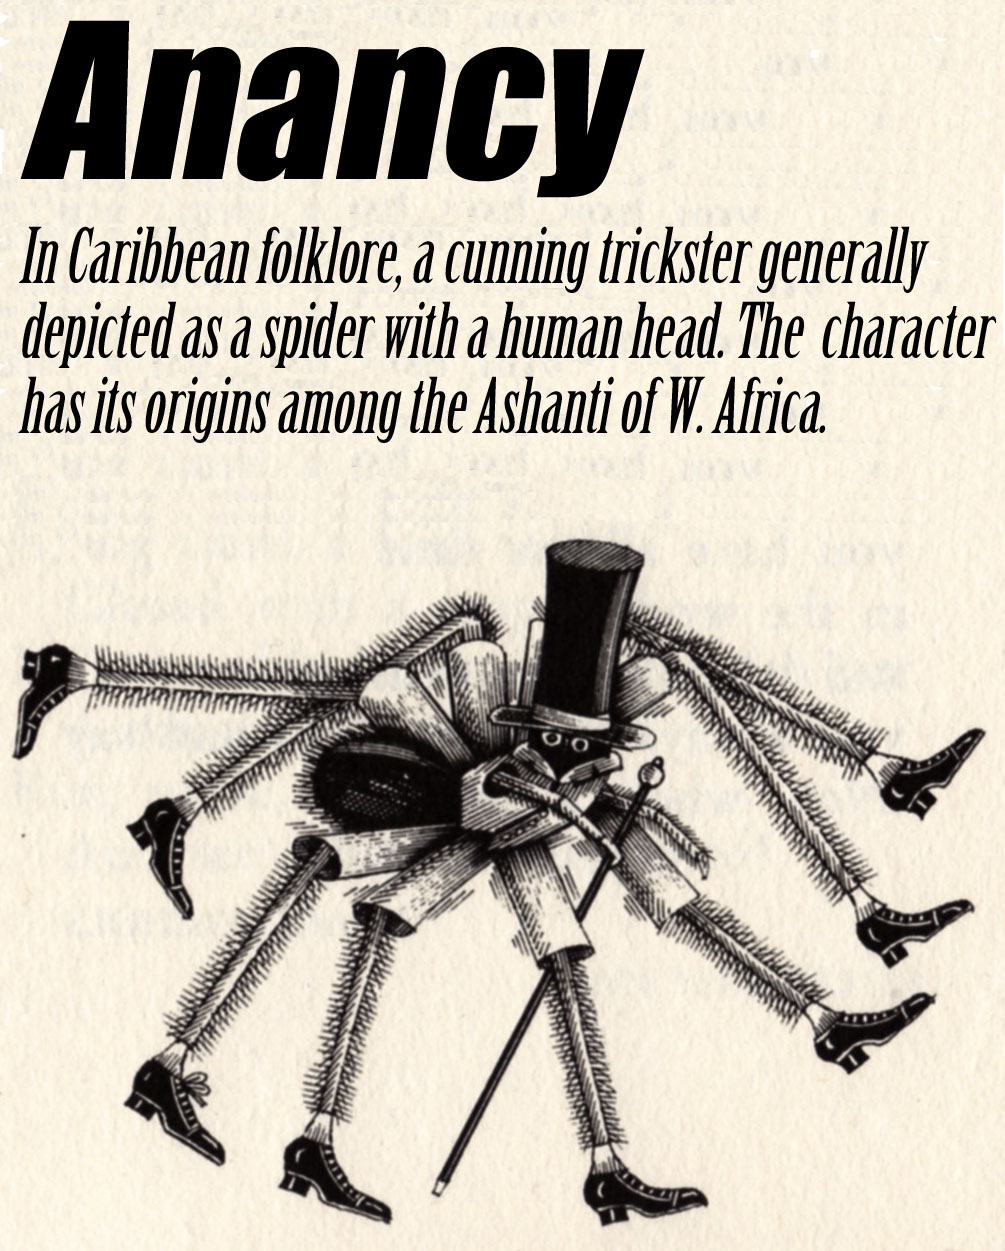 A depiction of Anancy the spider.